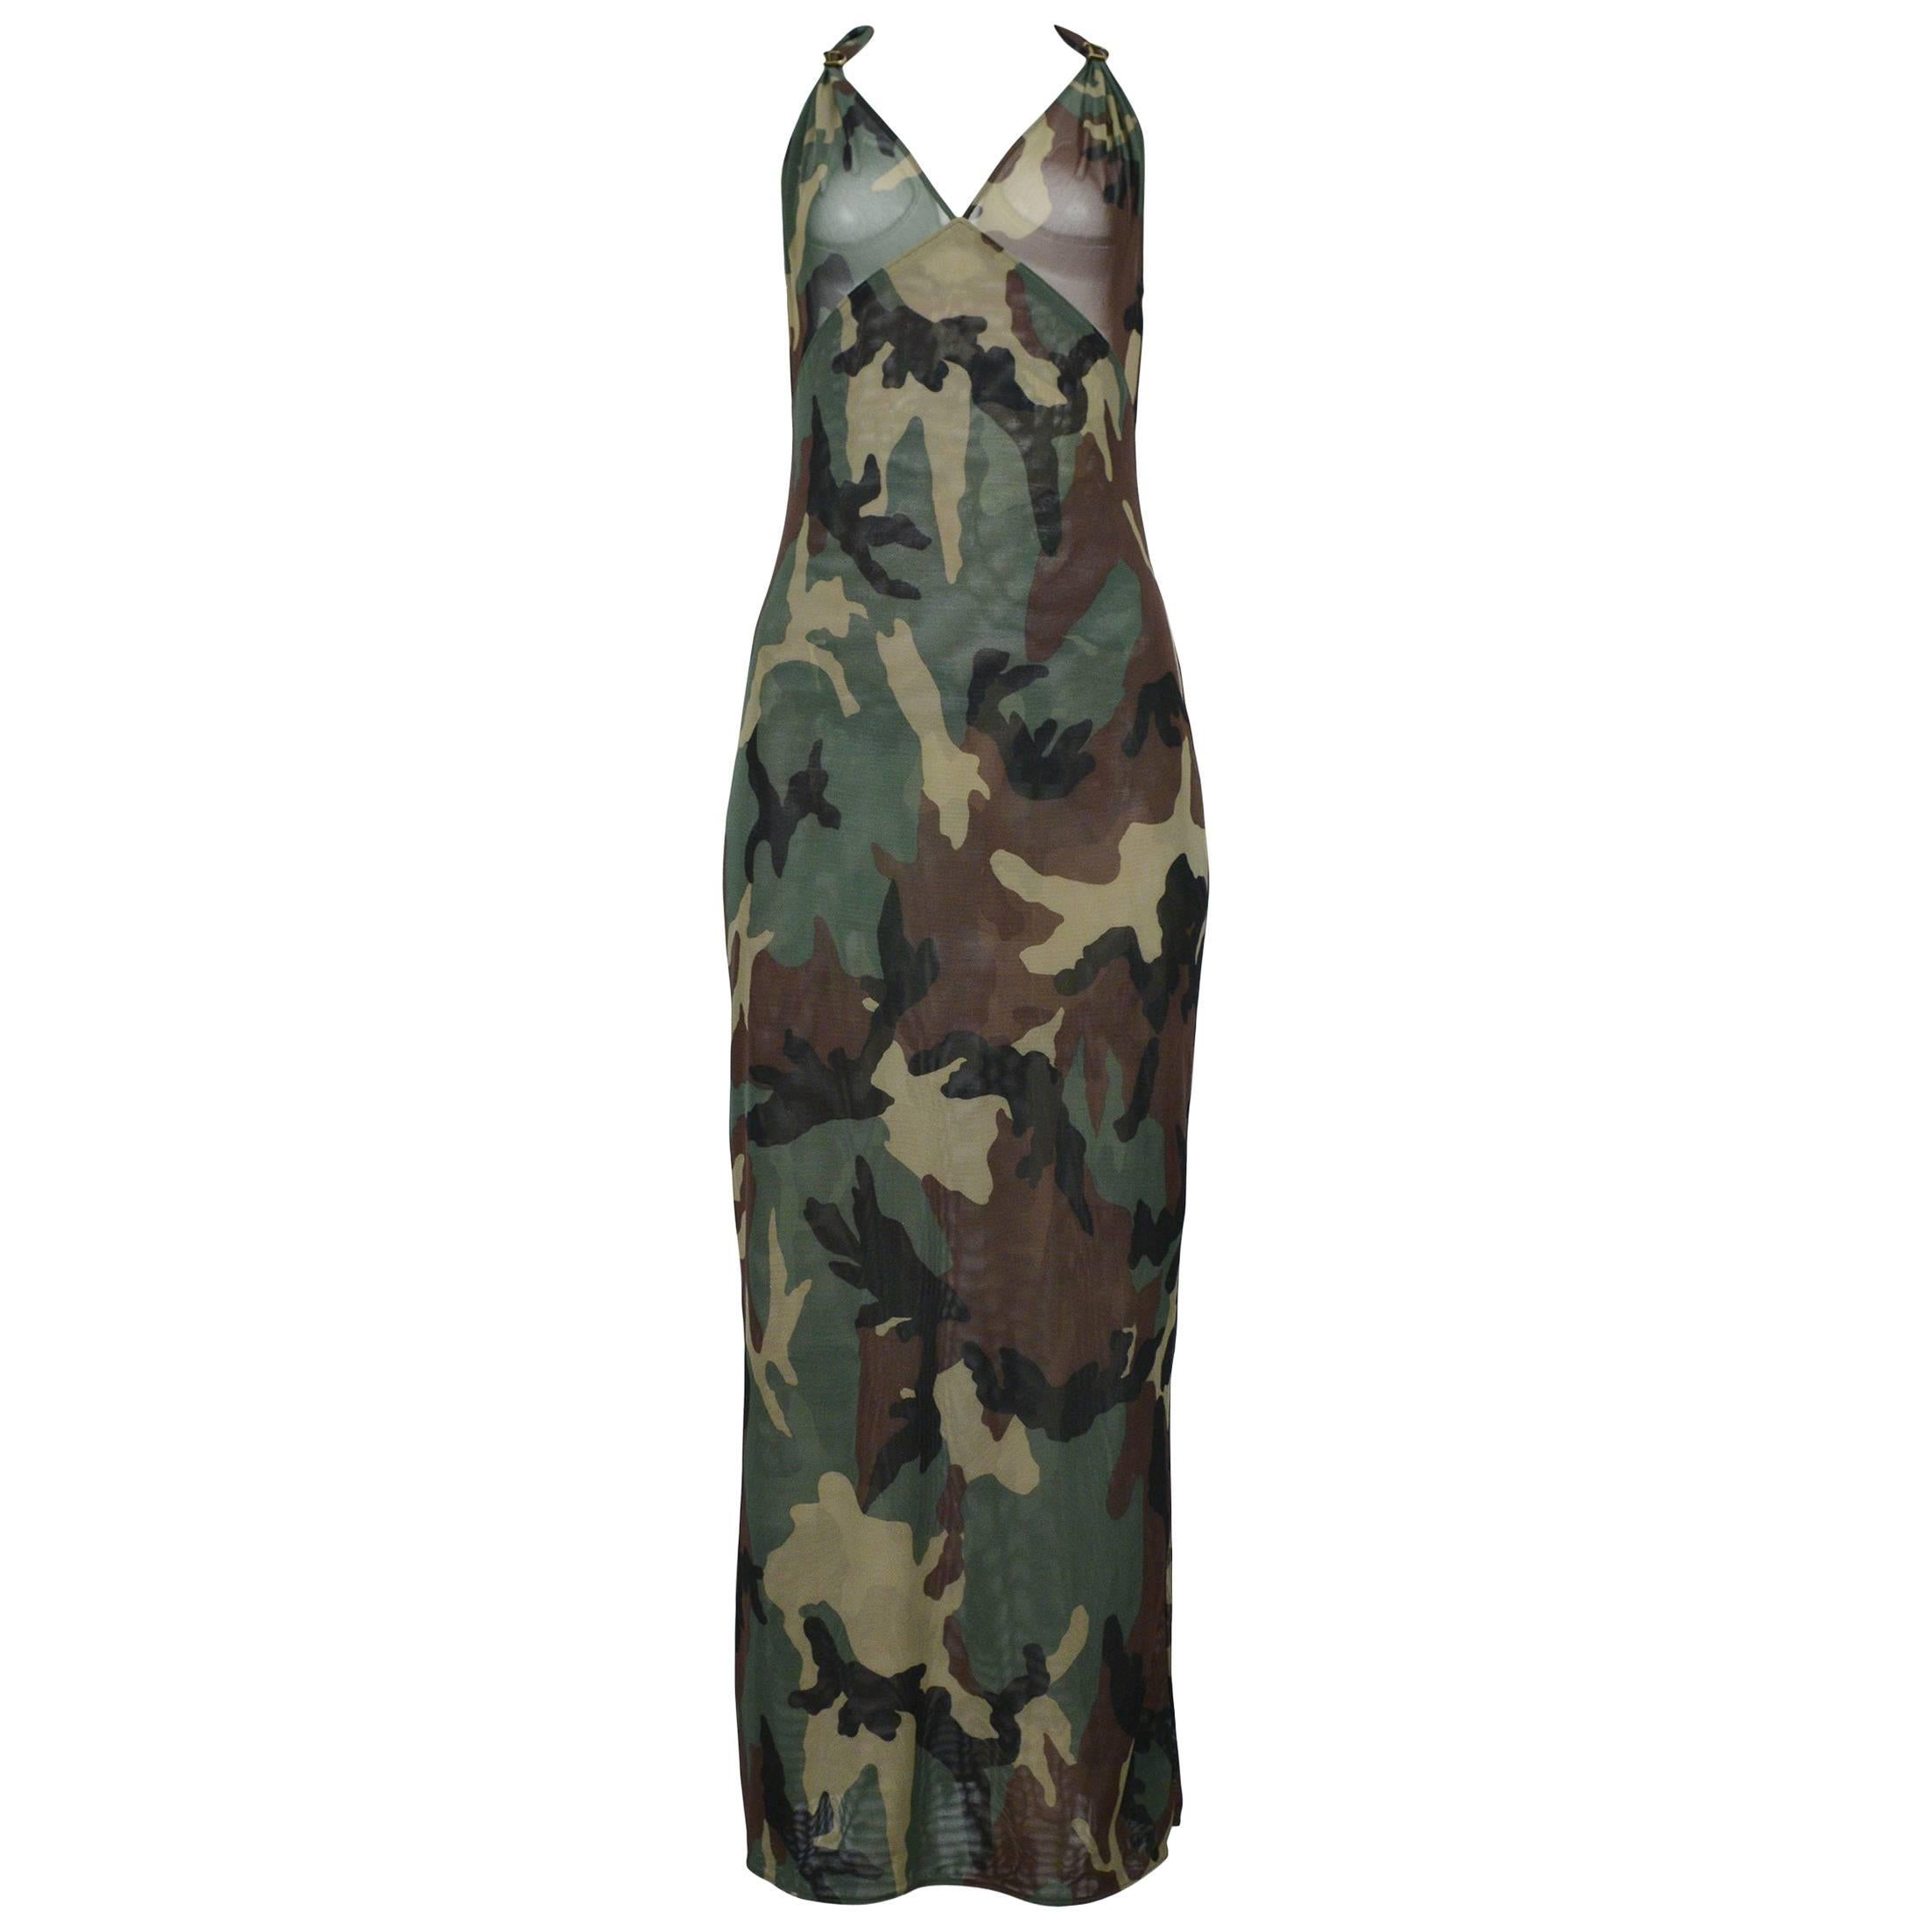 Dior By John Galliano Camouflage Mesh Halter Gown with "D" Hardware 2001 